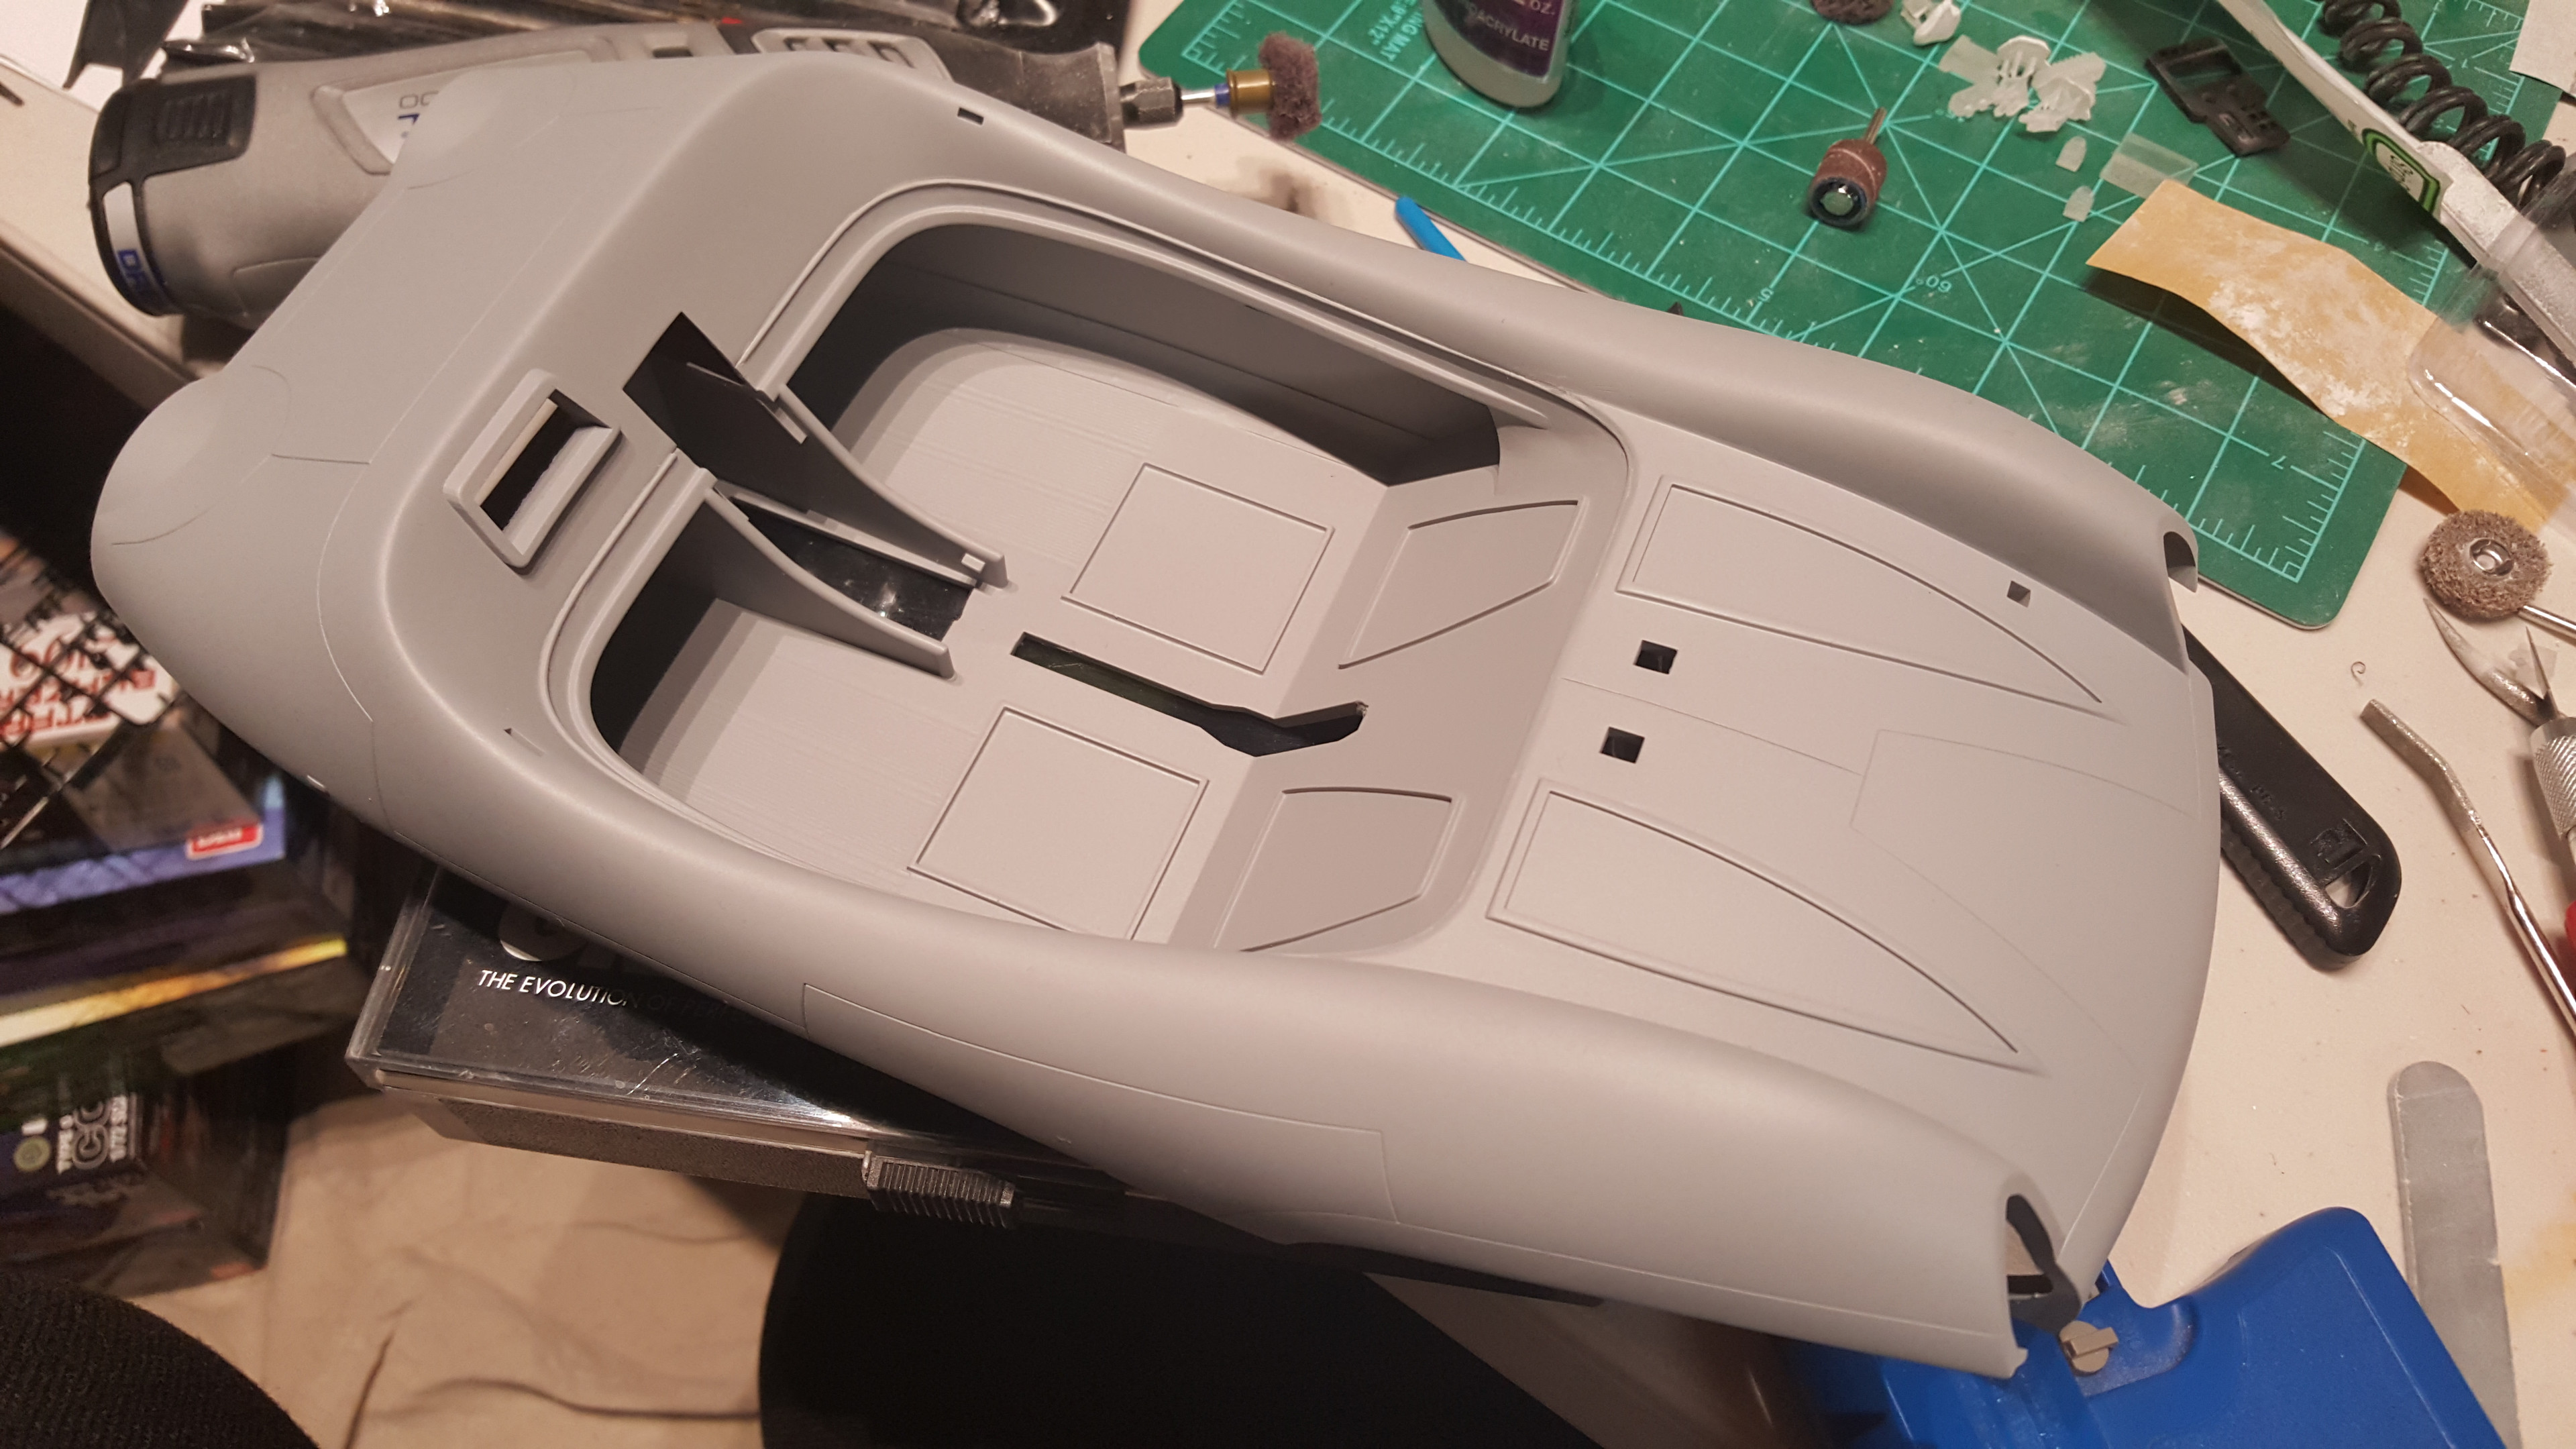 attached the interior to the top half and primed it